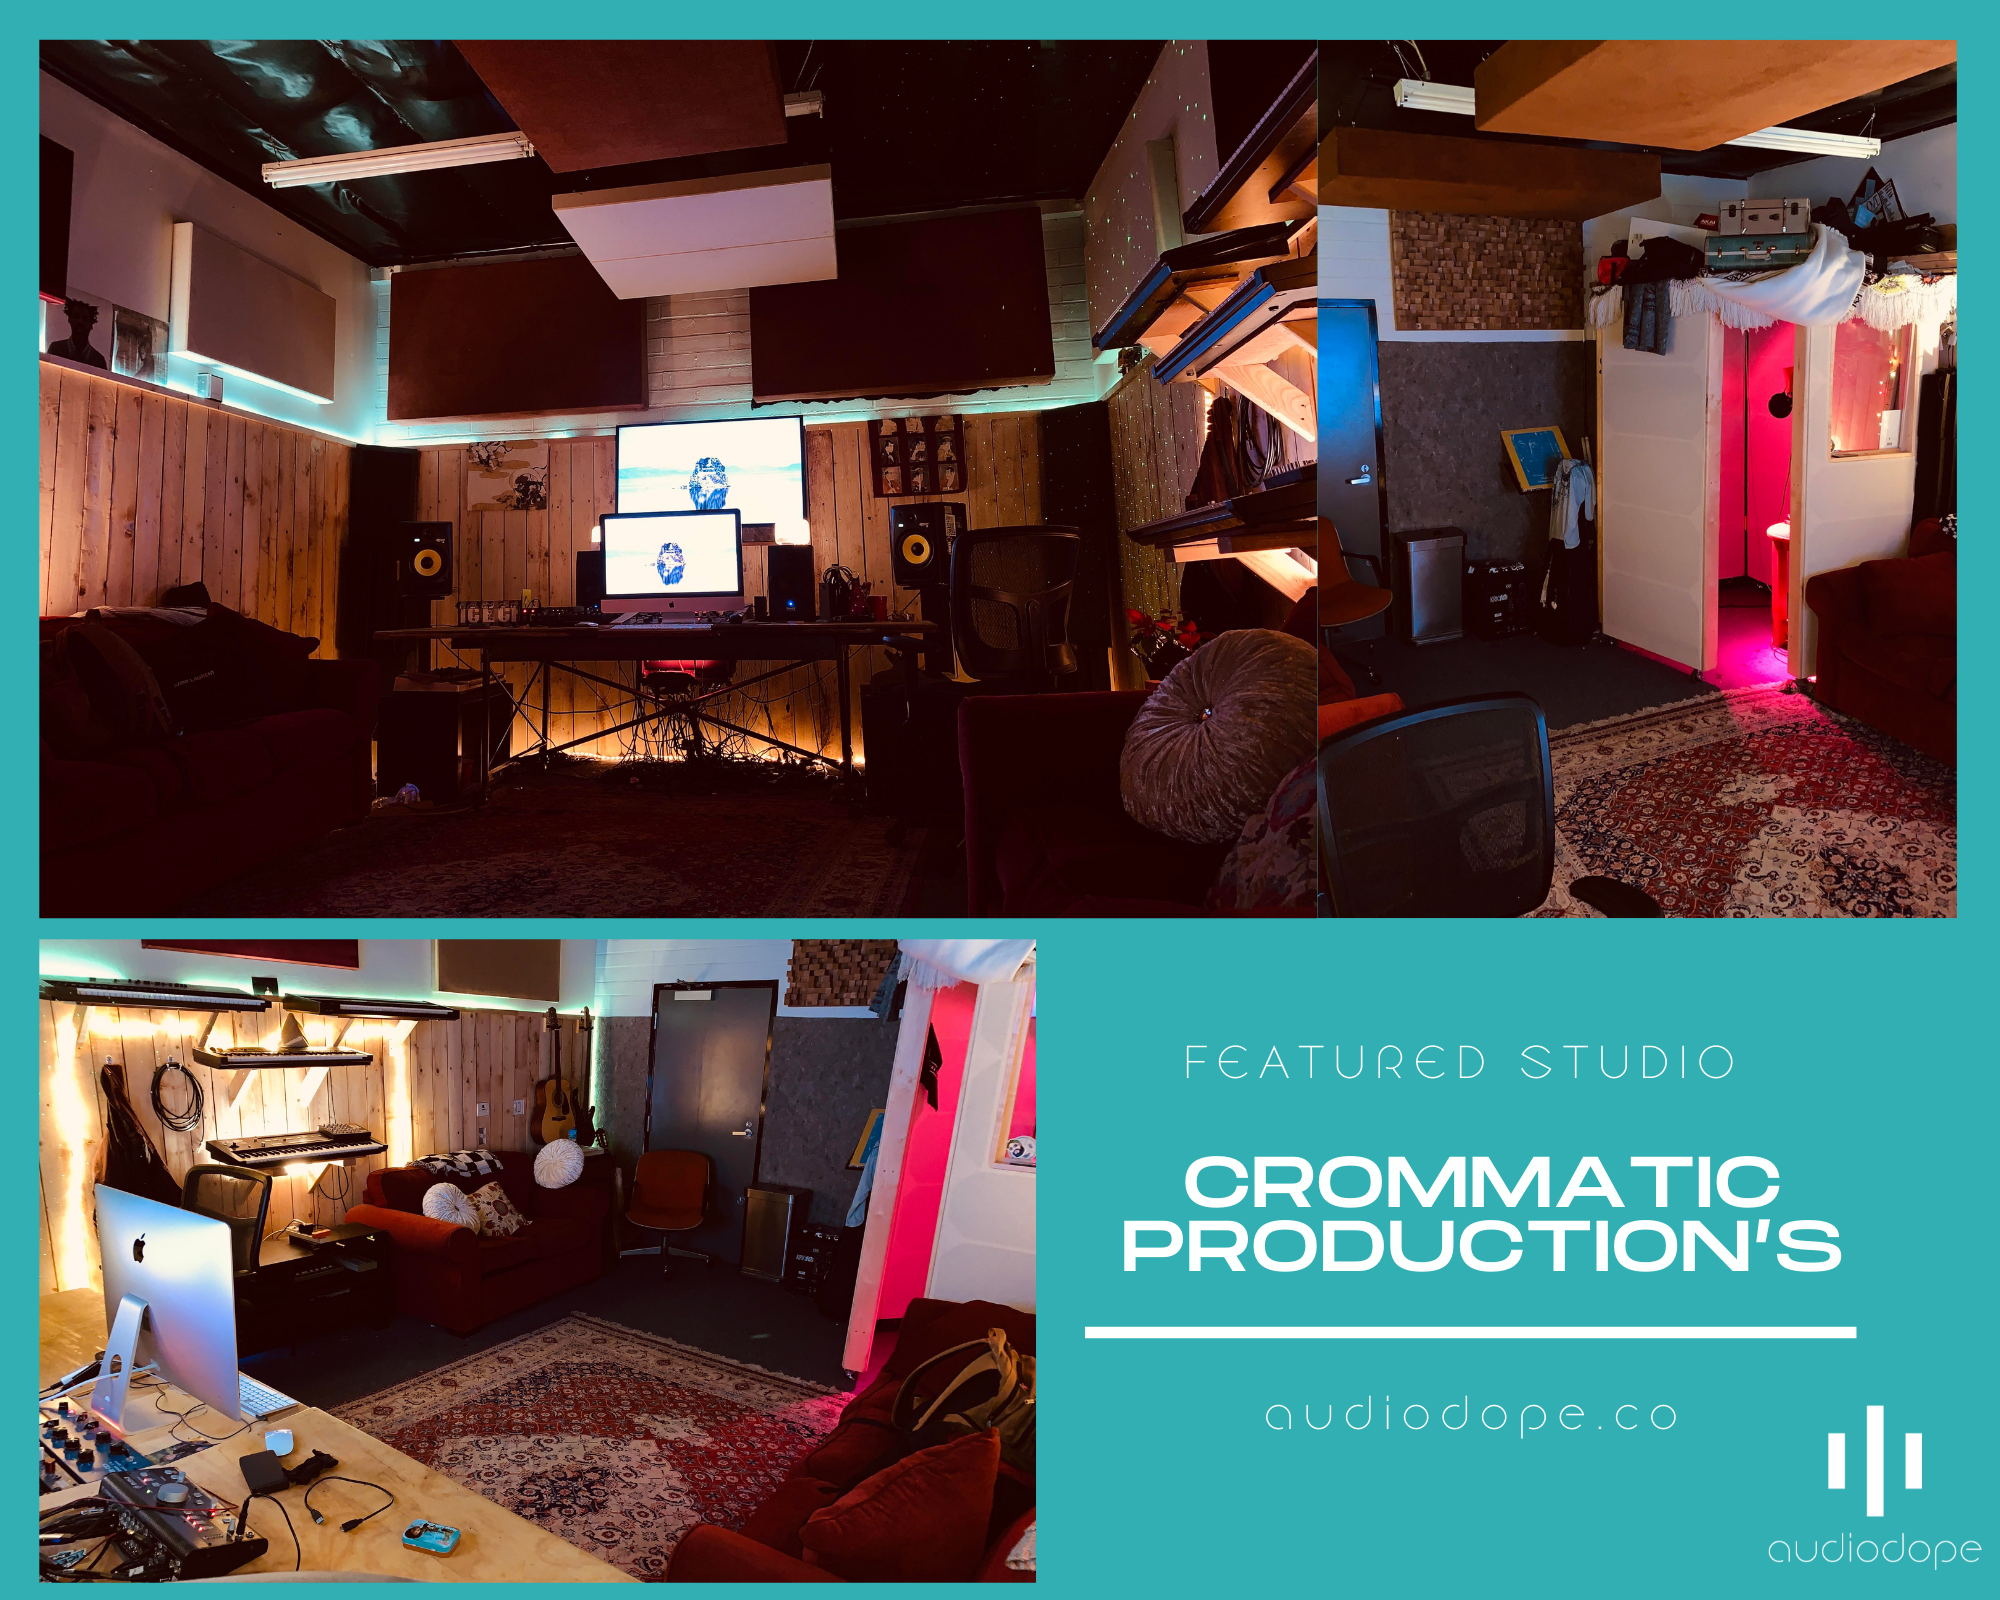 Featured Studio - Crommatic Production's